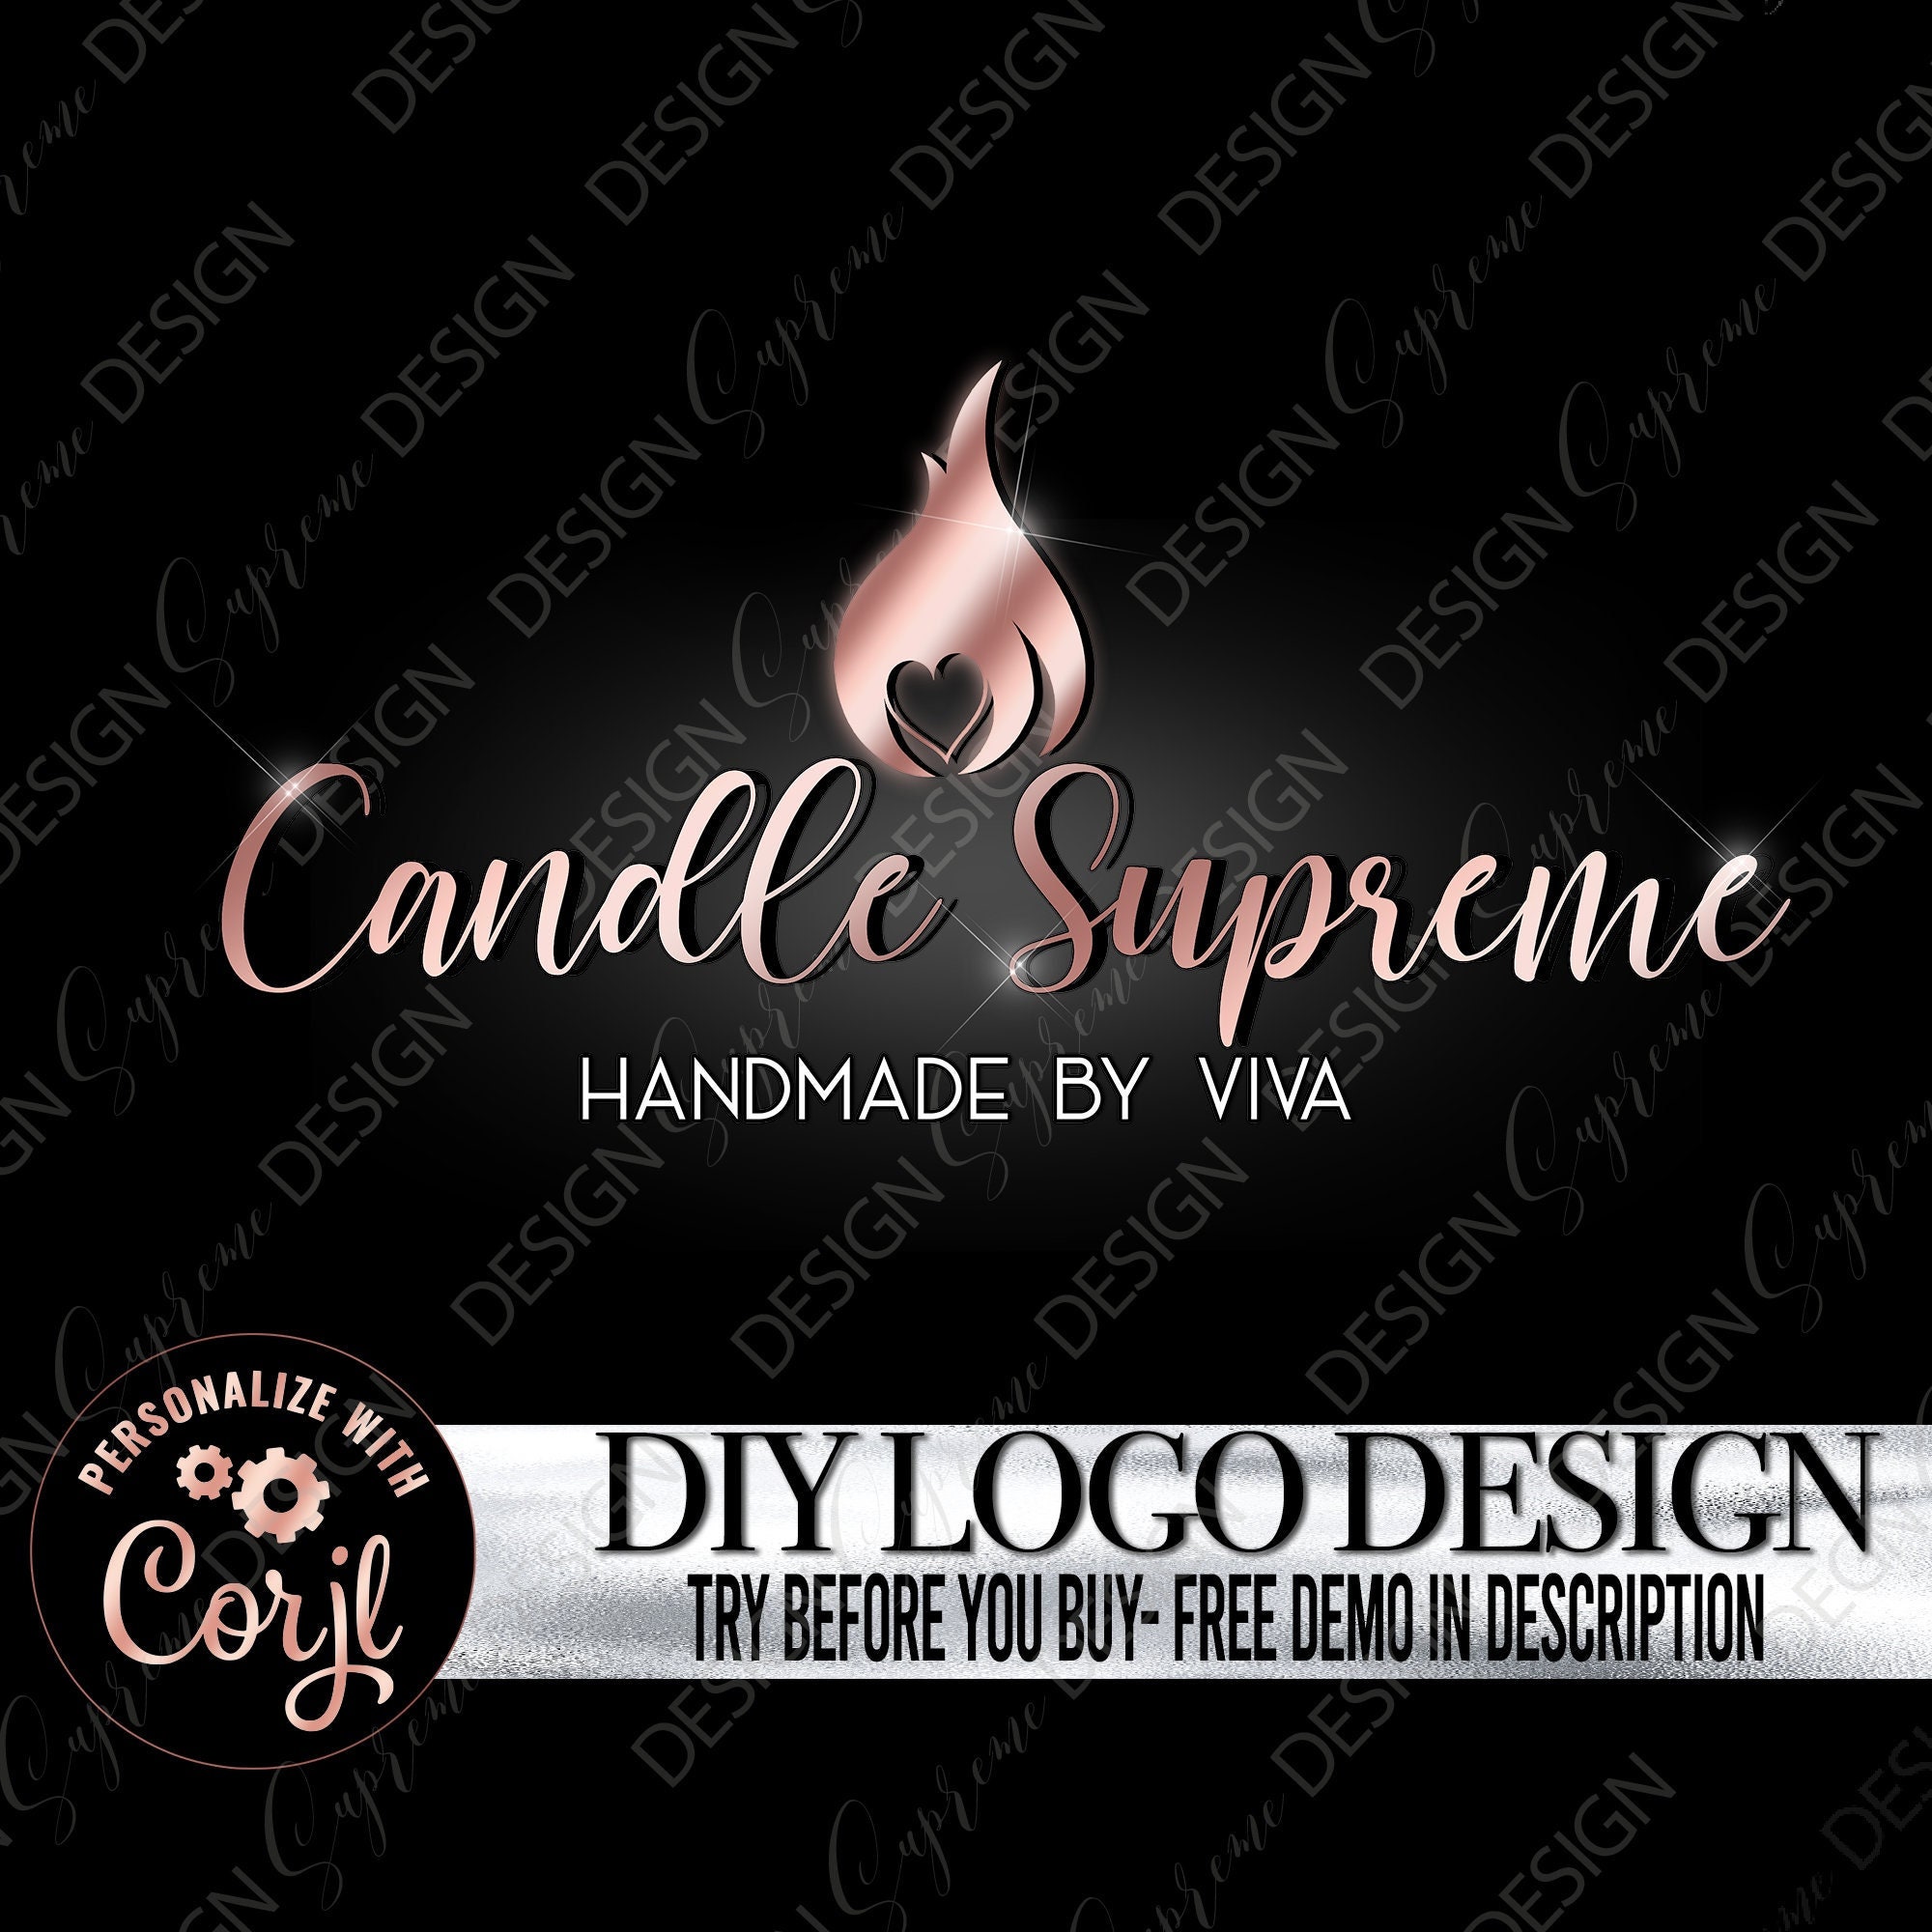 Personalized Candle Labels, Personalized Candle Stickers, Candle Stickers,  Personalized Candleson Stickers 